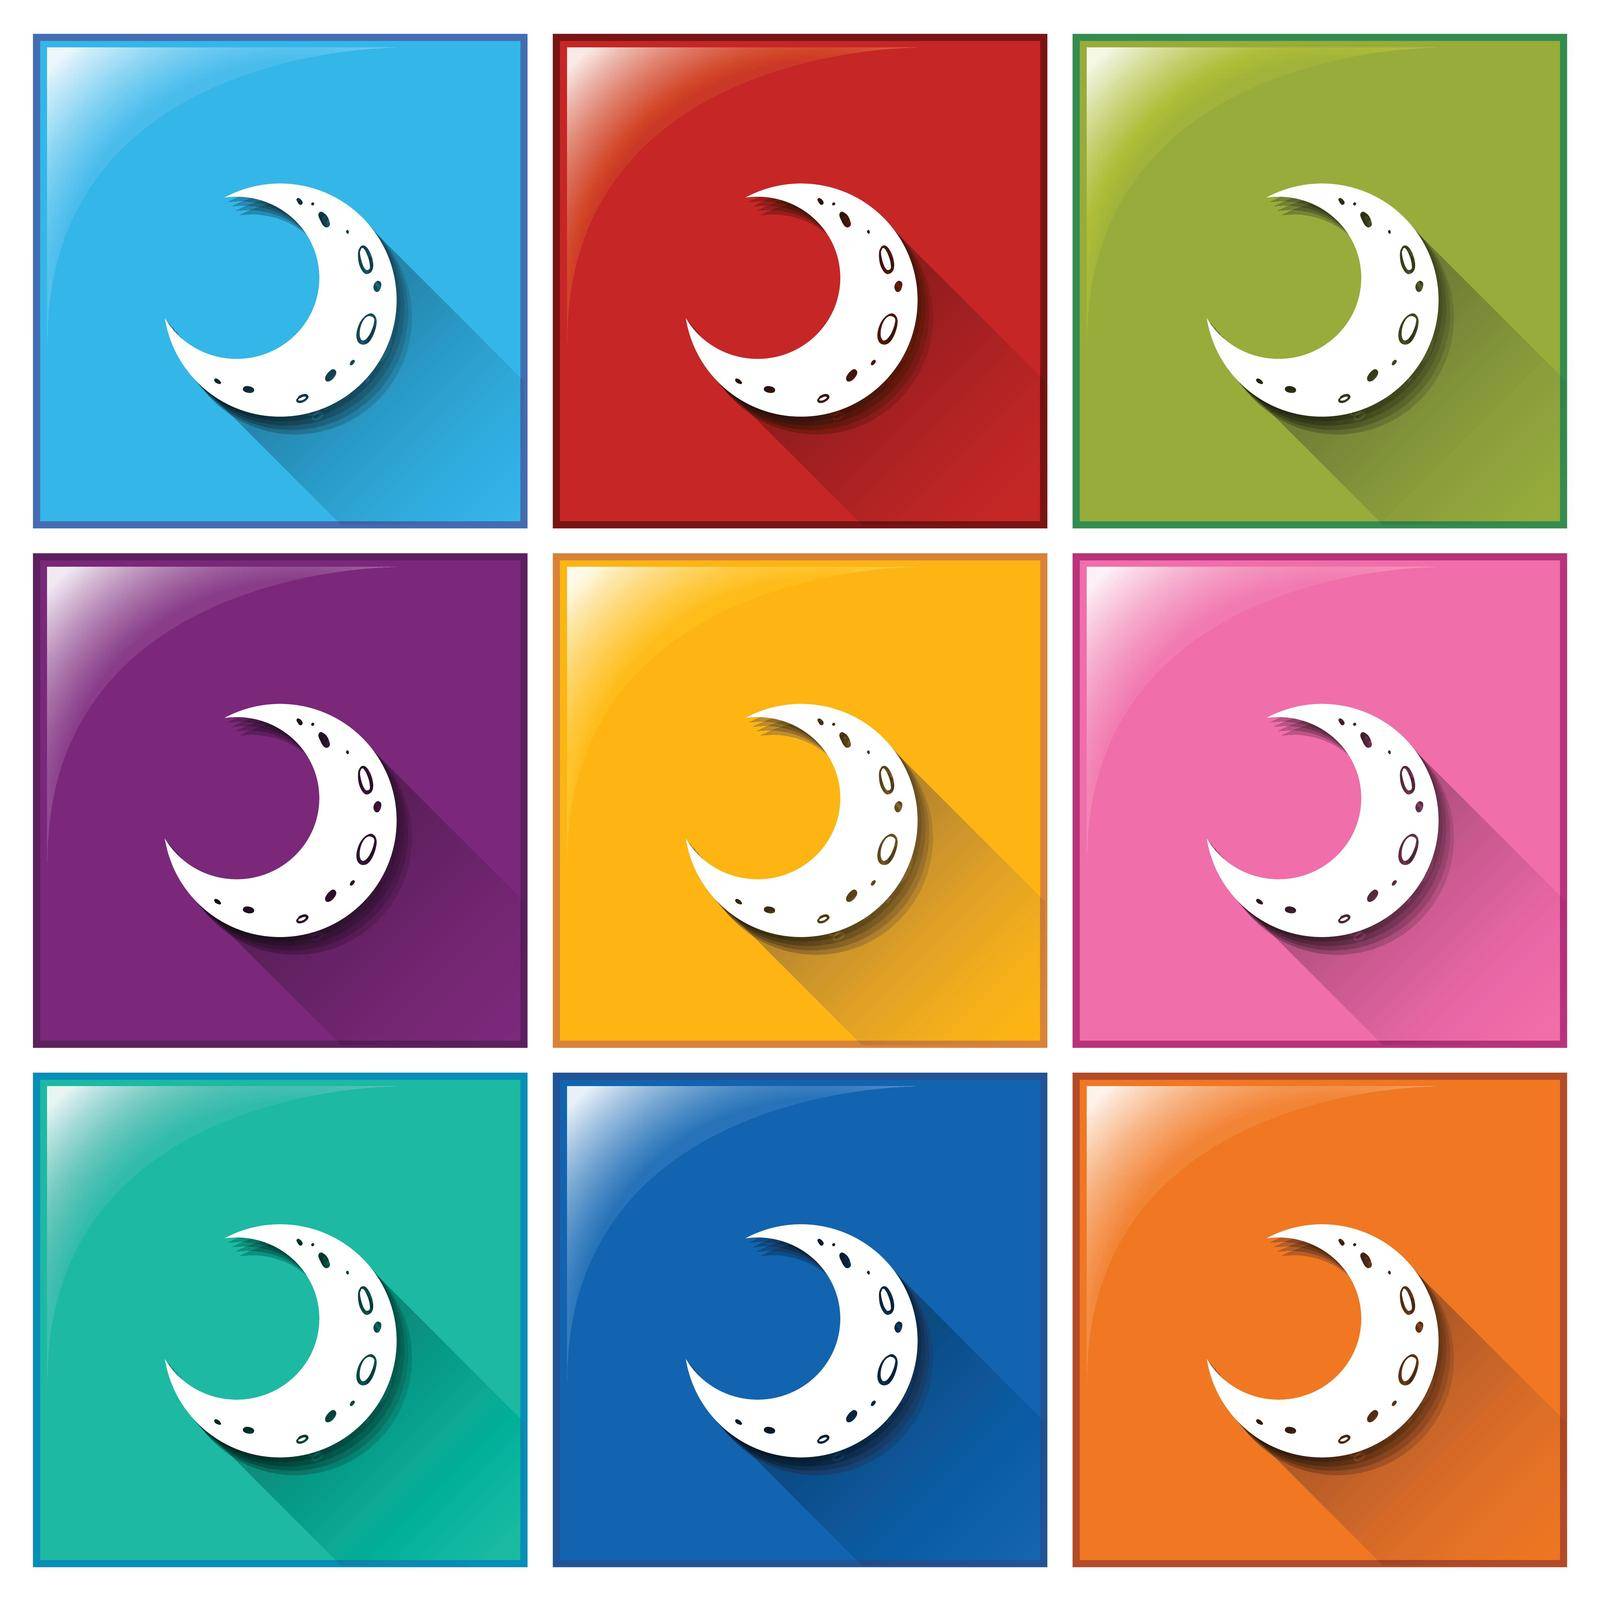 Illustration of the icons with moons on a white background